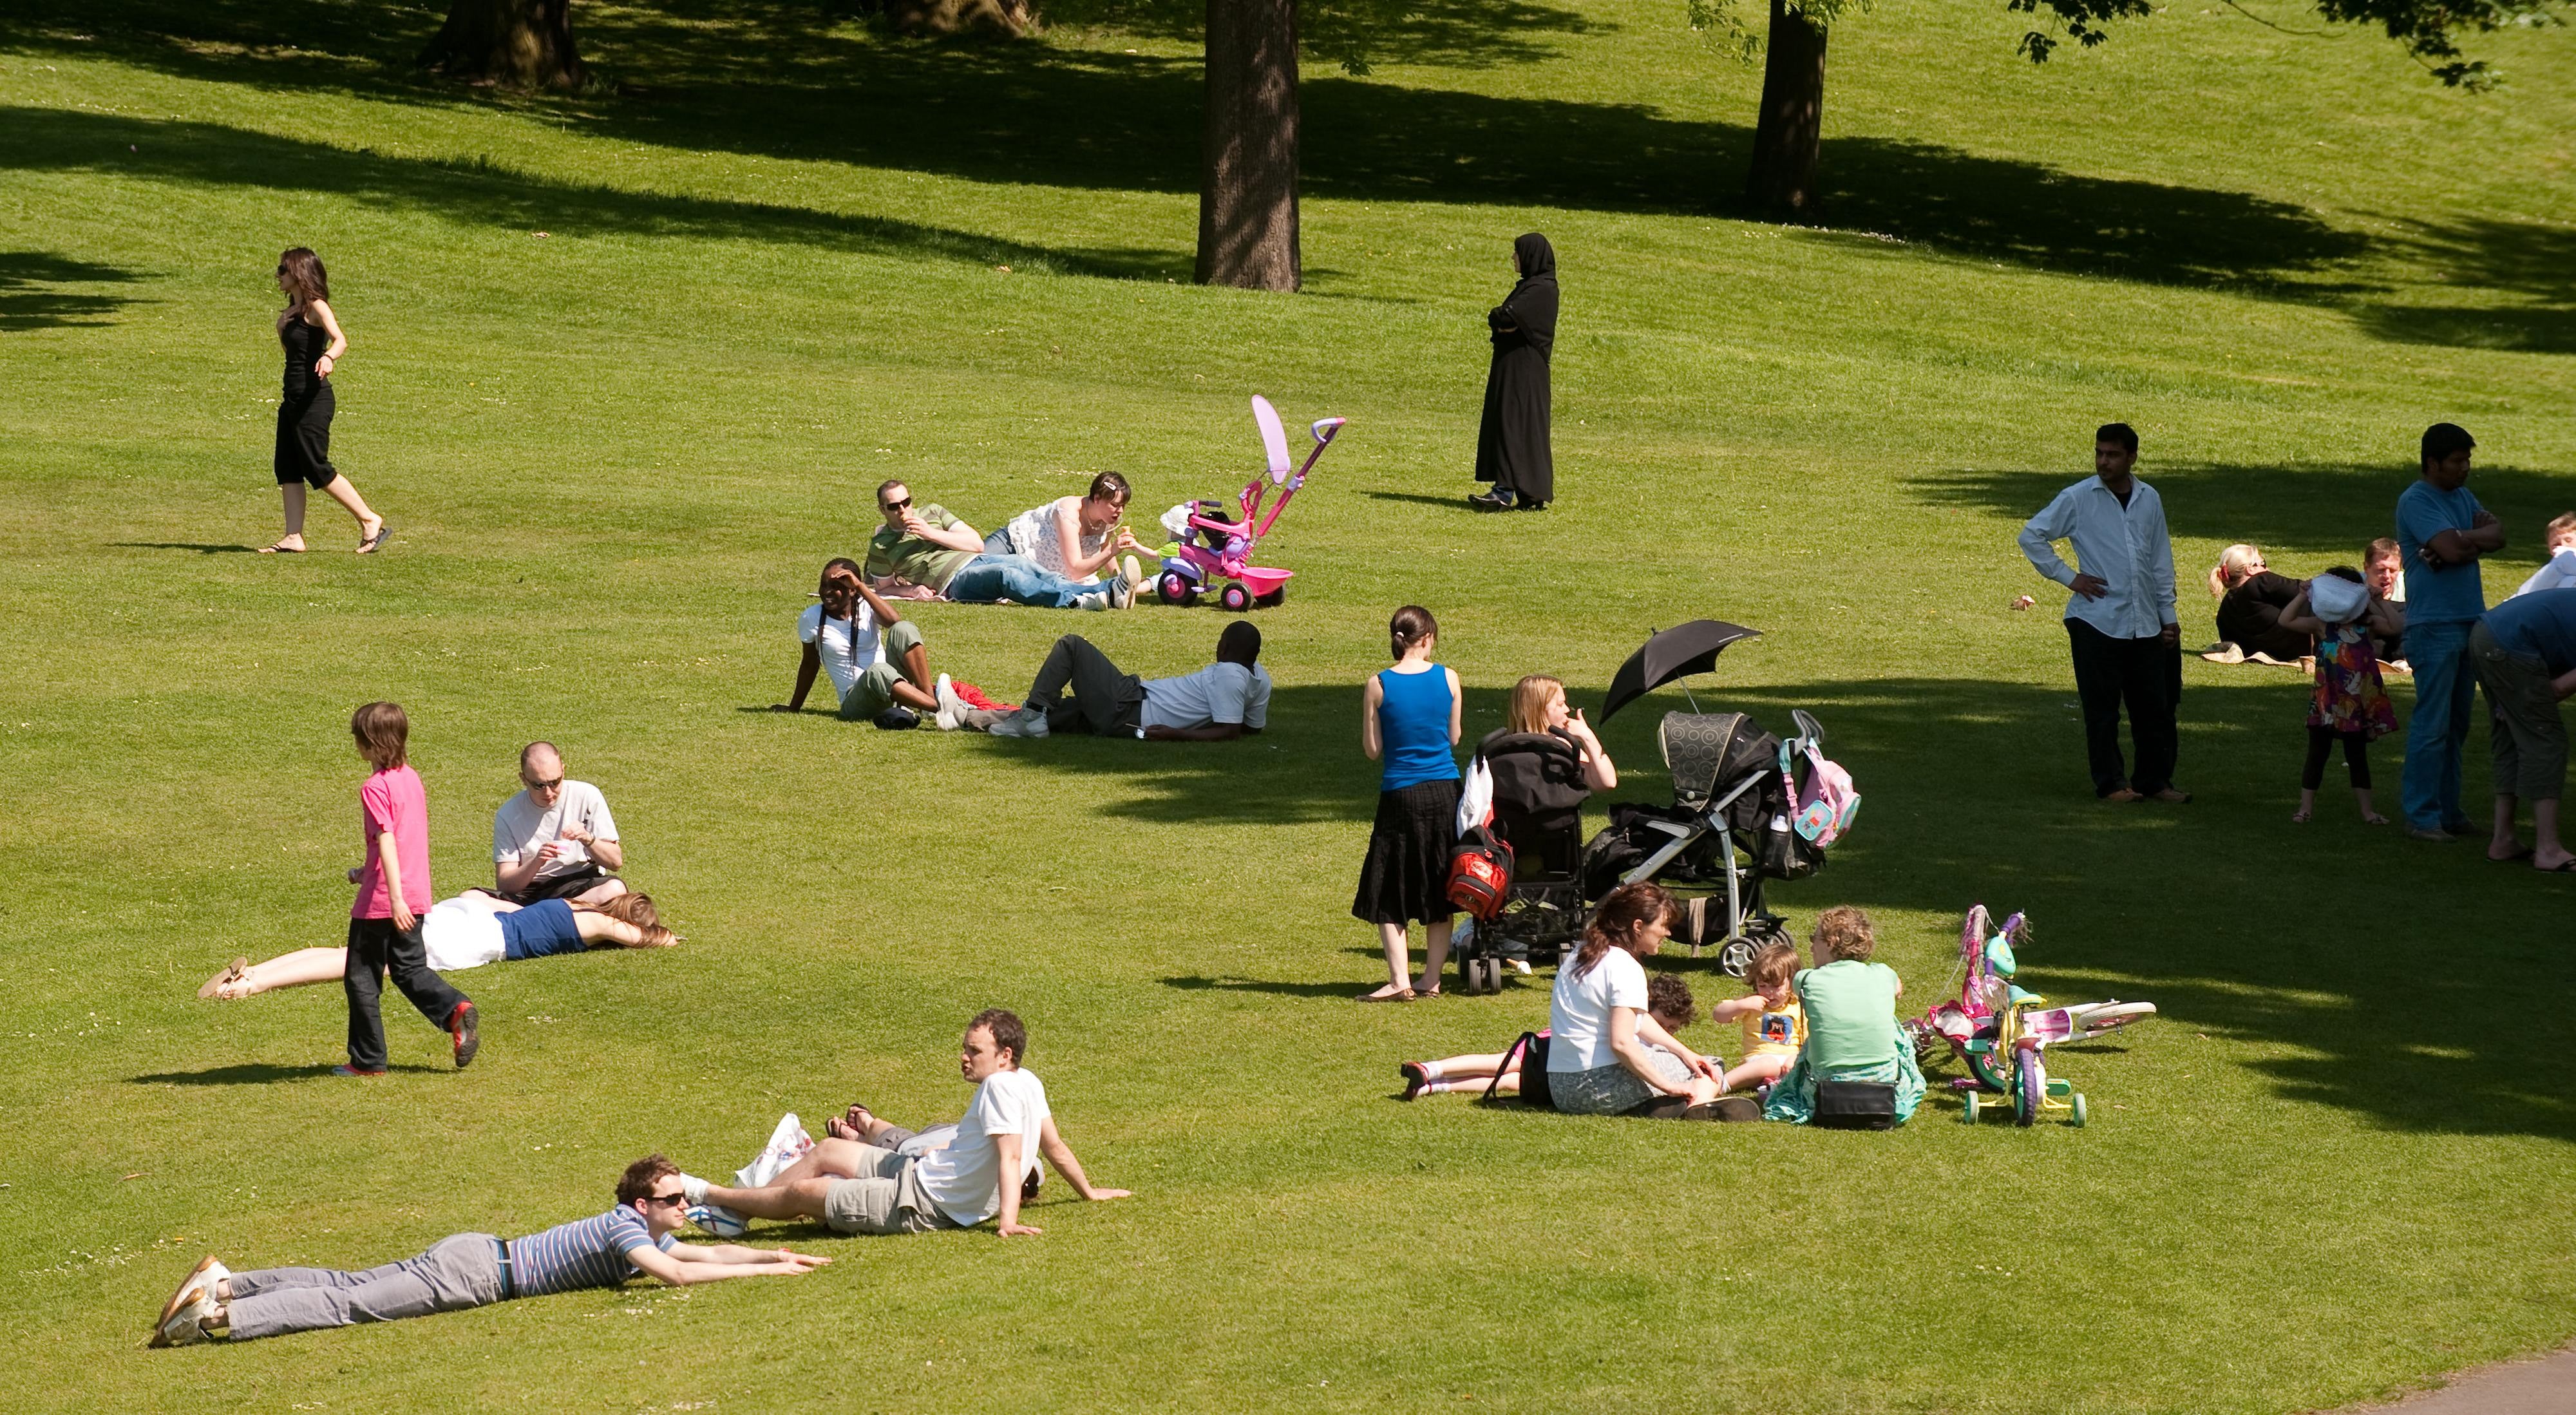 met office, summer may finally be on the way as met office says temperatures could reach 25c this week